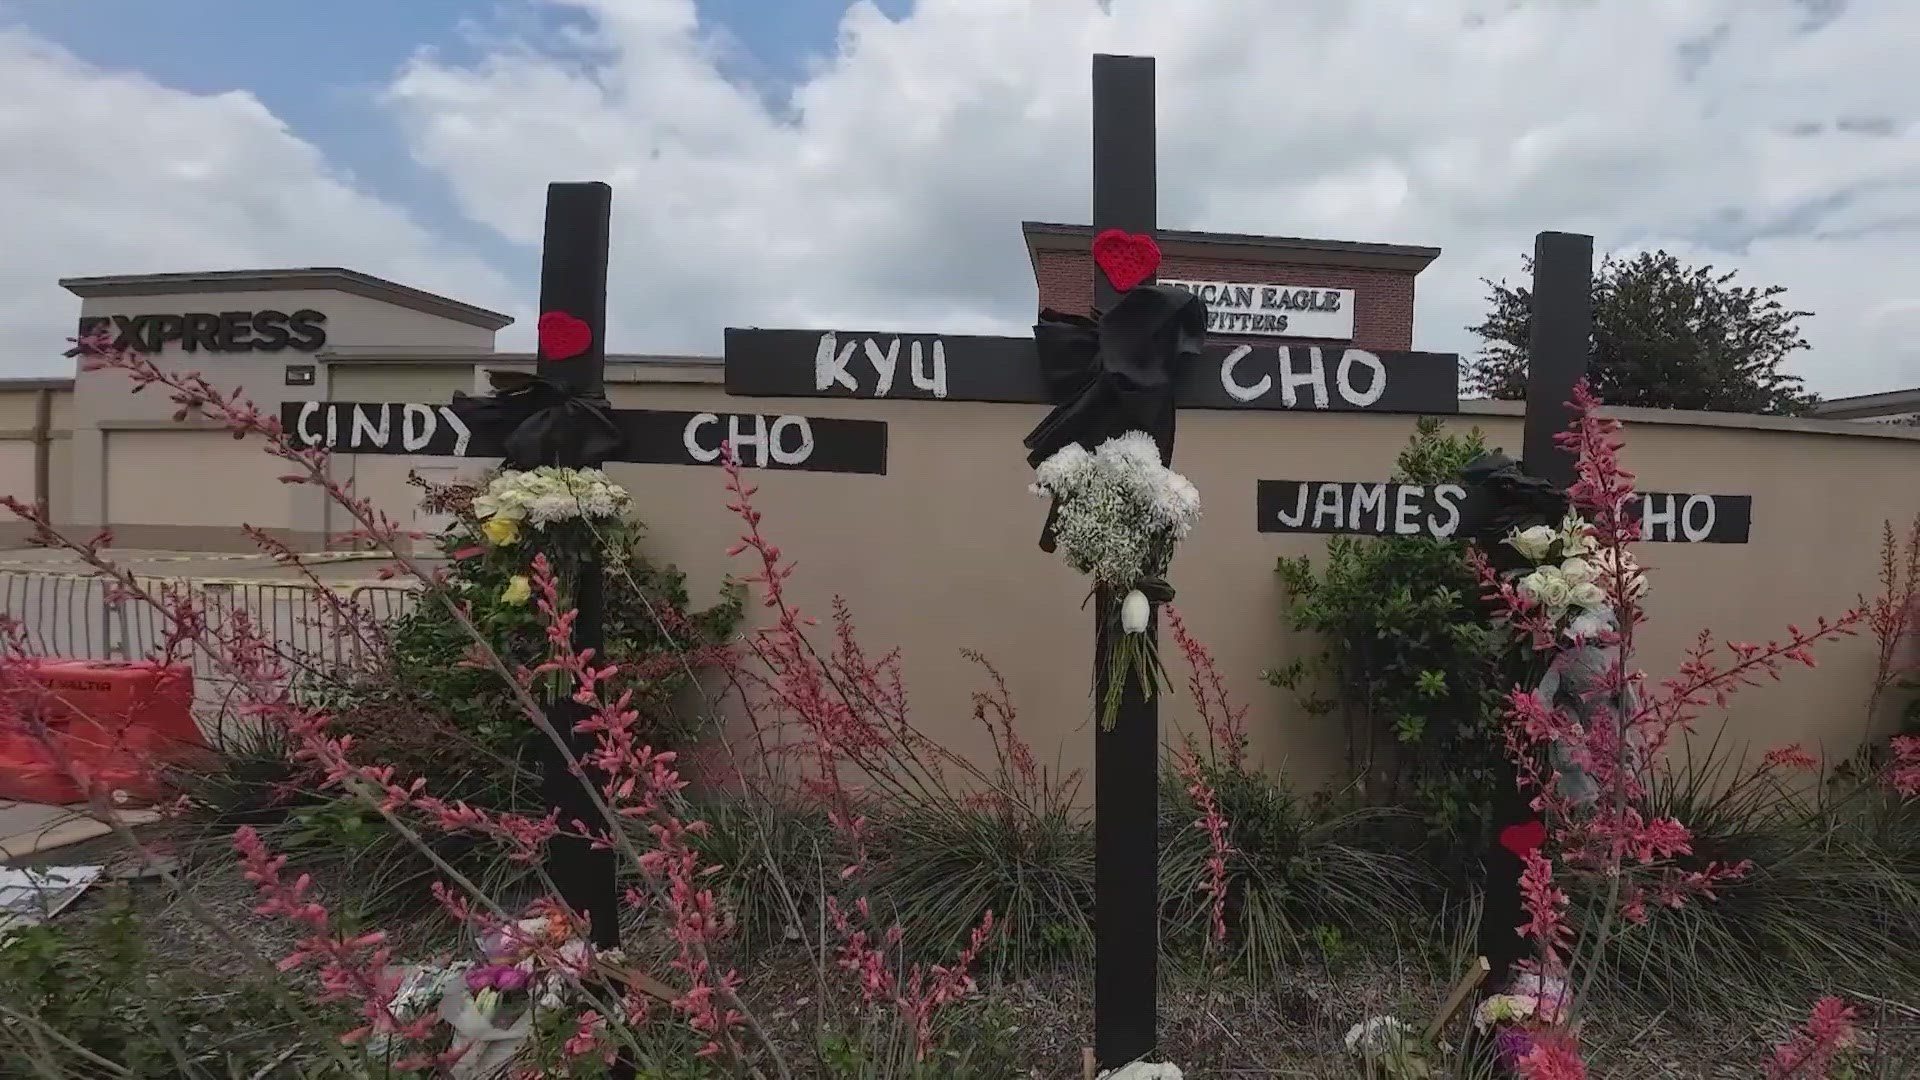 Services were held Thursday, May 11 for Cindy and Kyu Cho and their 3-year-old son James.